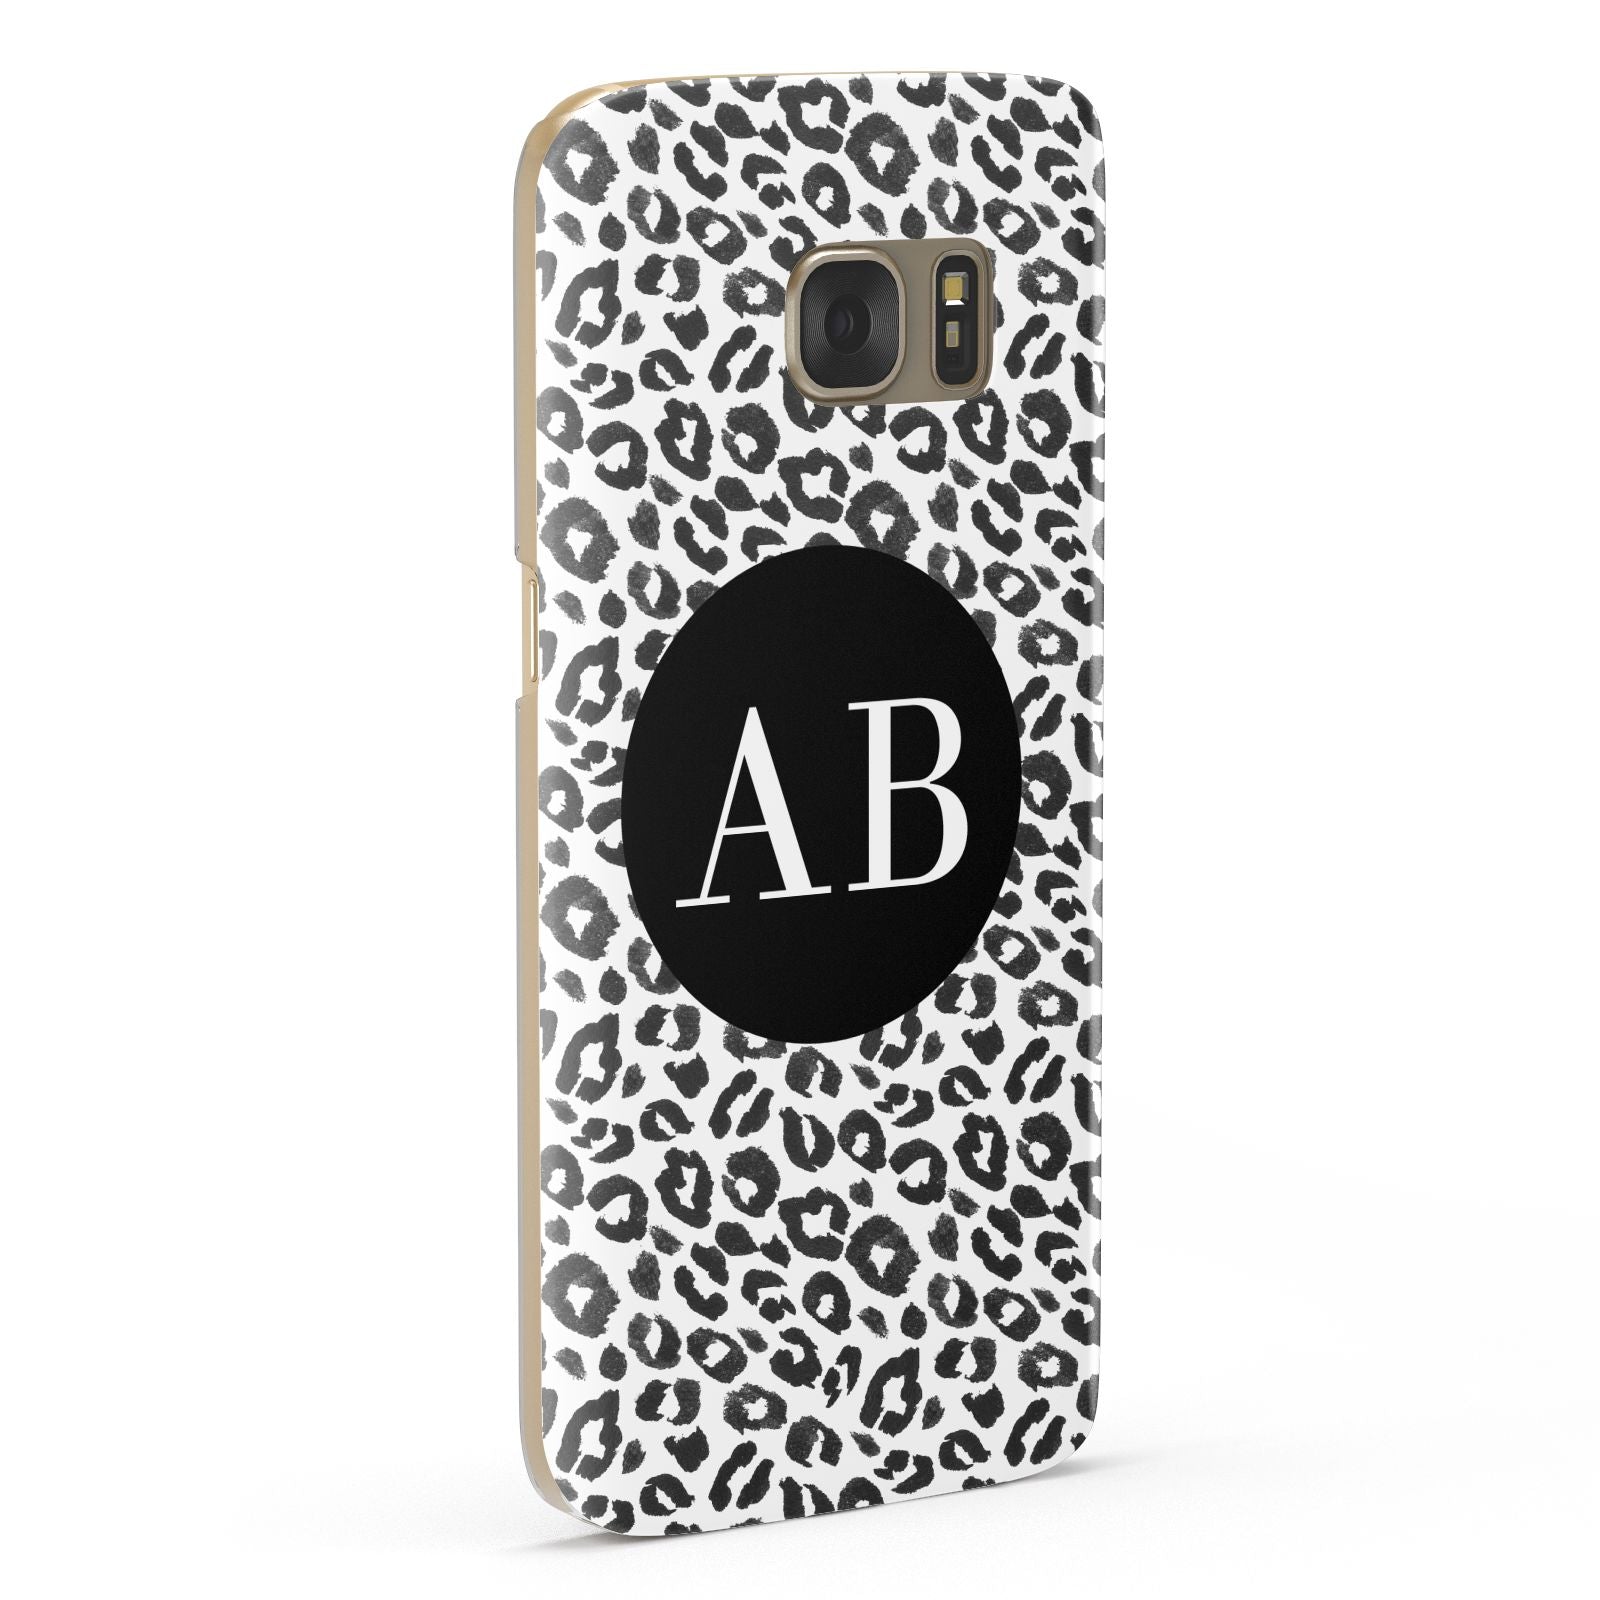 Leopard Print Black and White Samsung Galaxy Case Fourty Five Degrees